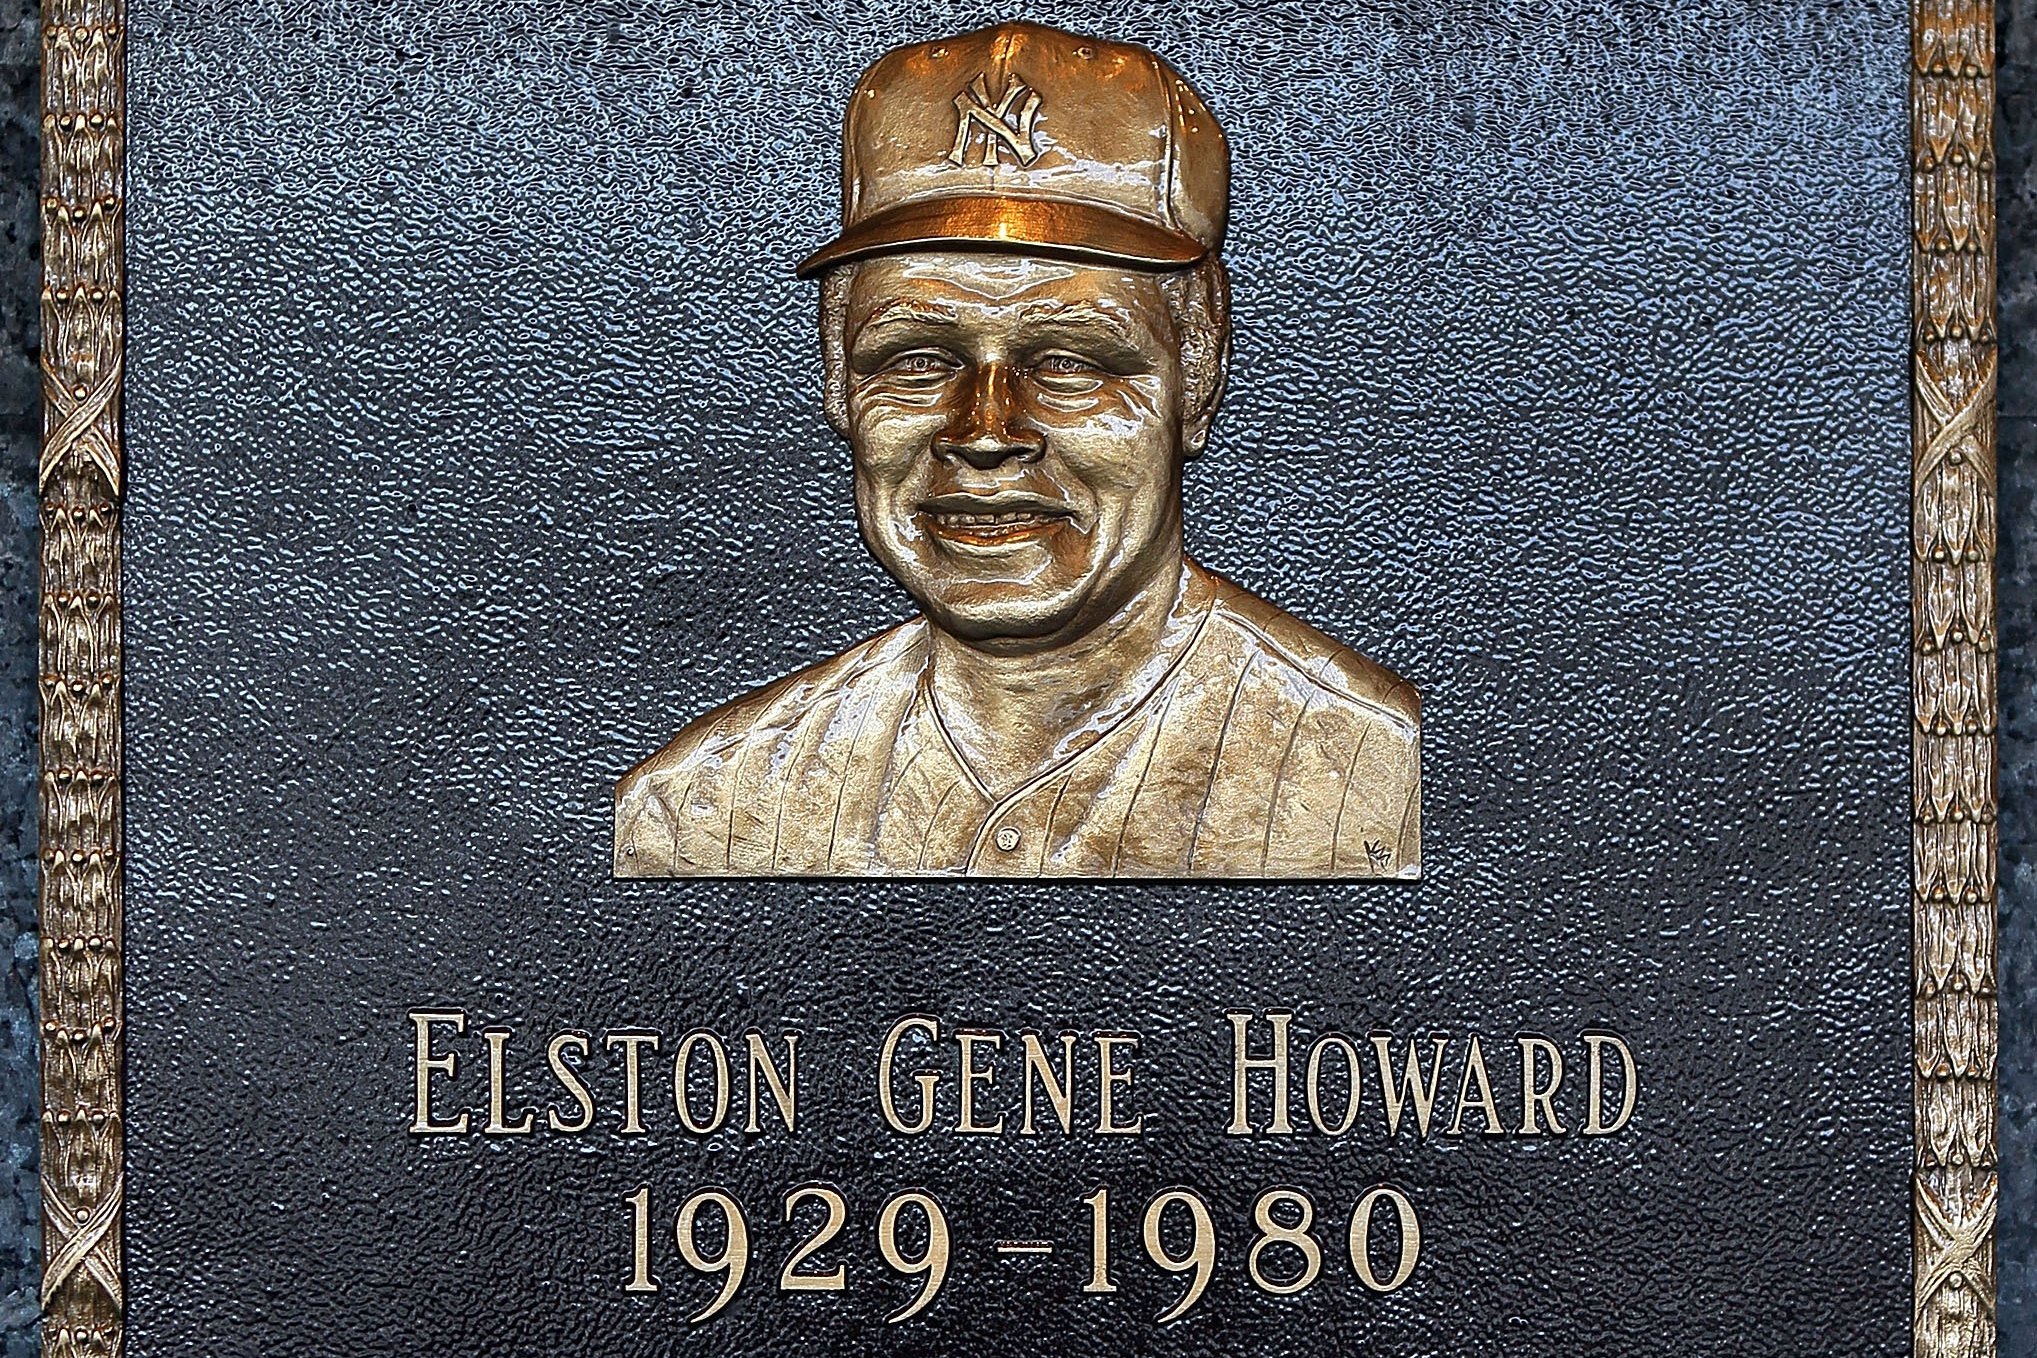 New York Yankees on X: #OnThisDay in 1955 Elston Howard became